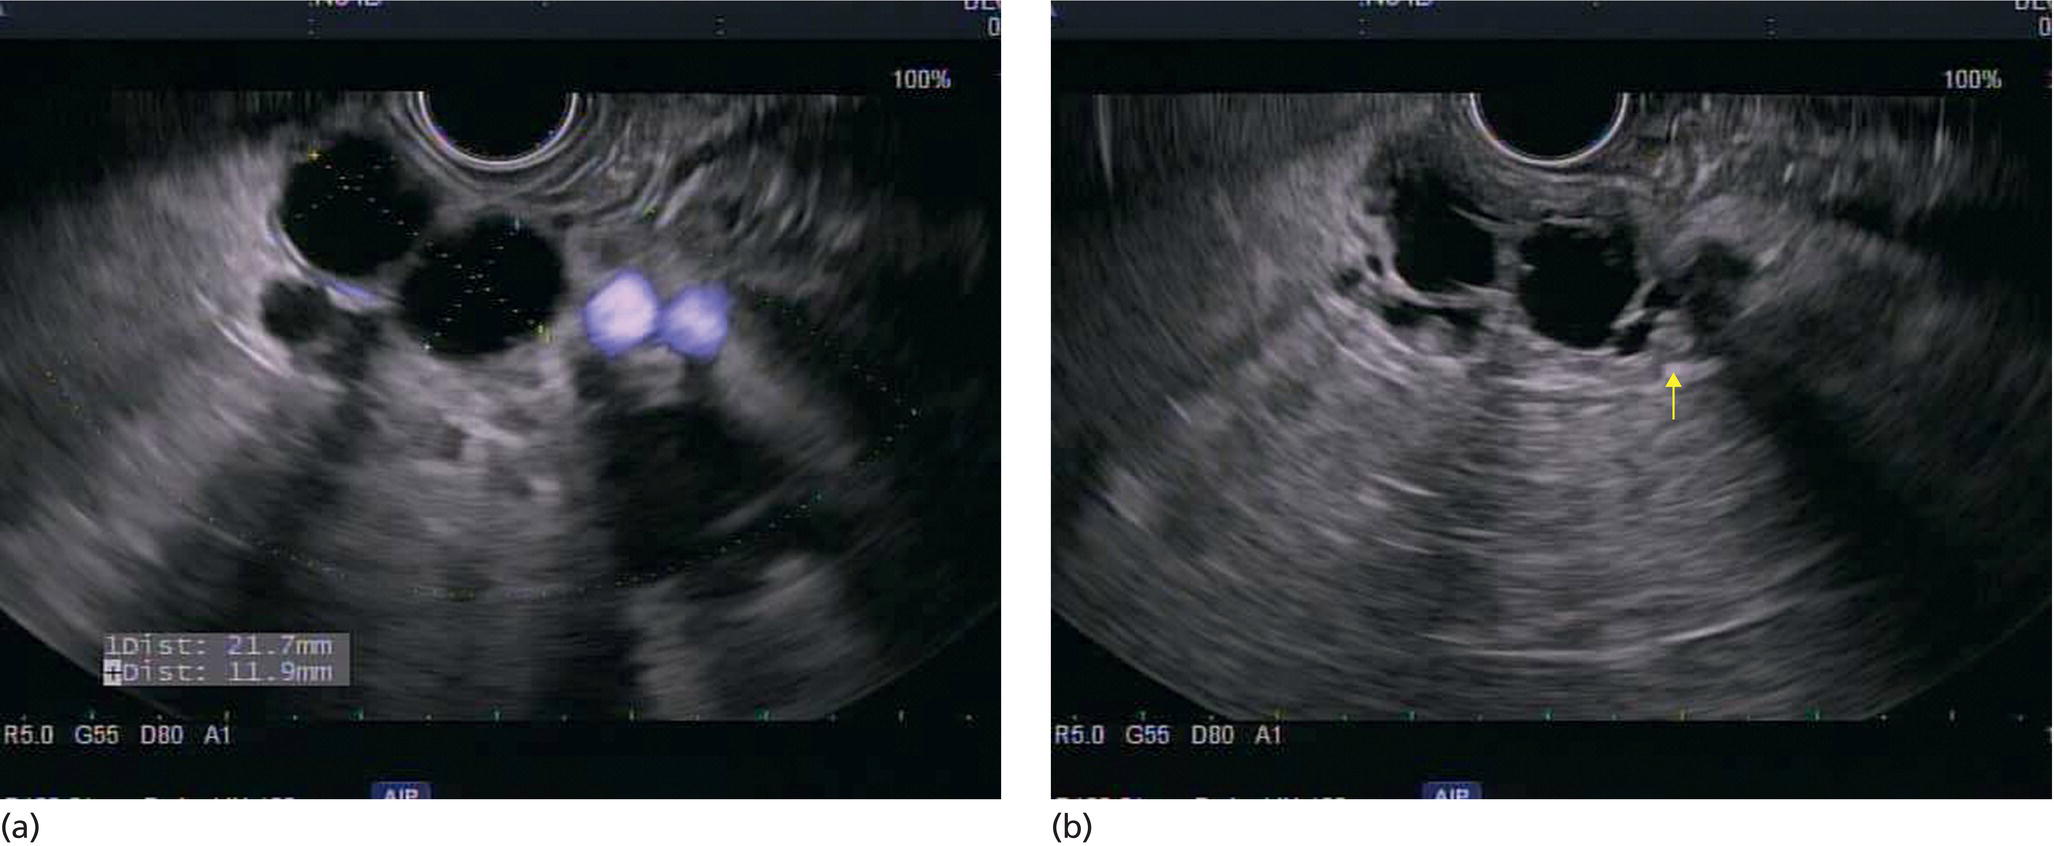 Photos depict (a) EUS of anechoic septated lobular cyst in tail of pancreas. (b) EUS of anechoic septated lobular pancreatic cyst with nodule (yellow arrow) proven malignant on surgical resection.